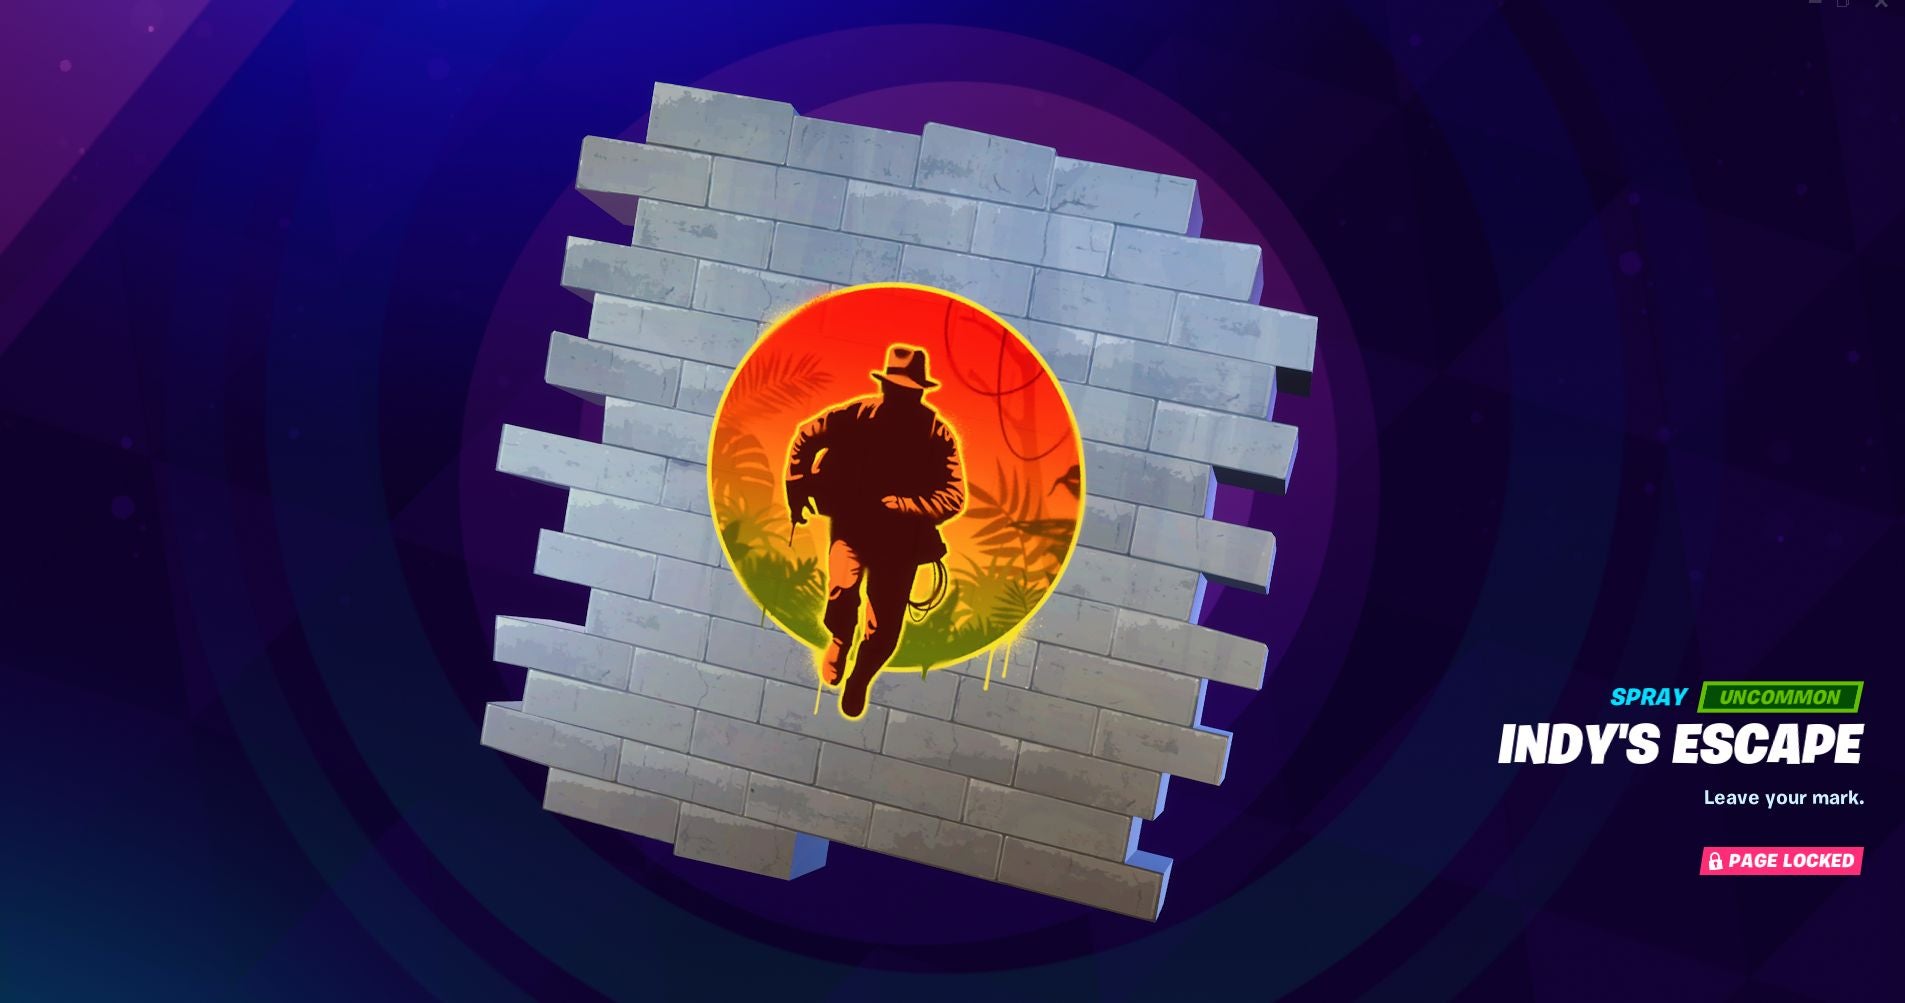 How to get the Fortnite Indiana Jones skin and every Indiana Jones challenge listed - 52